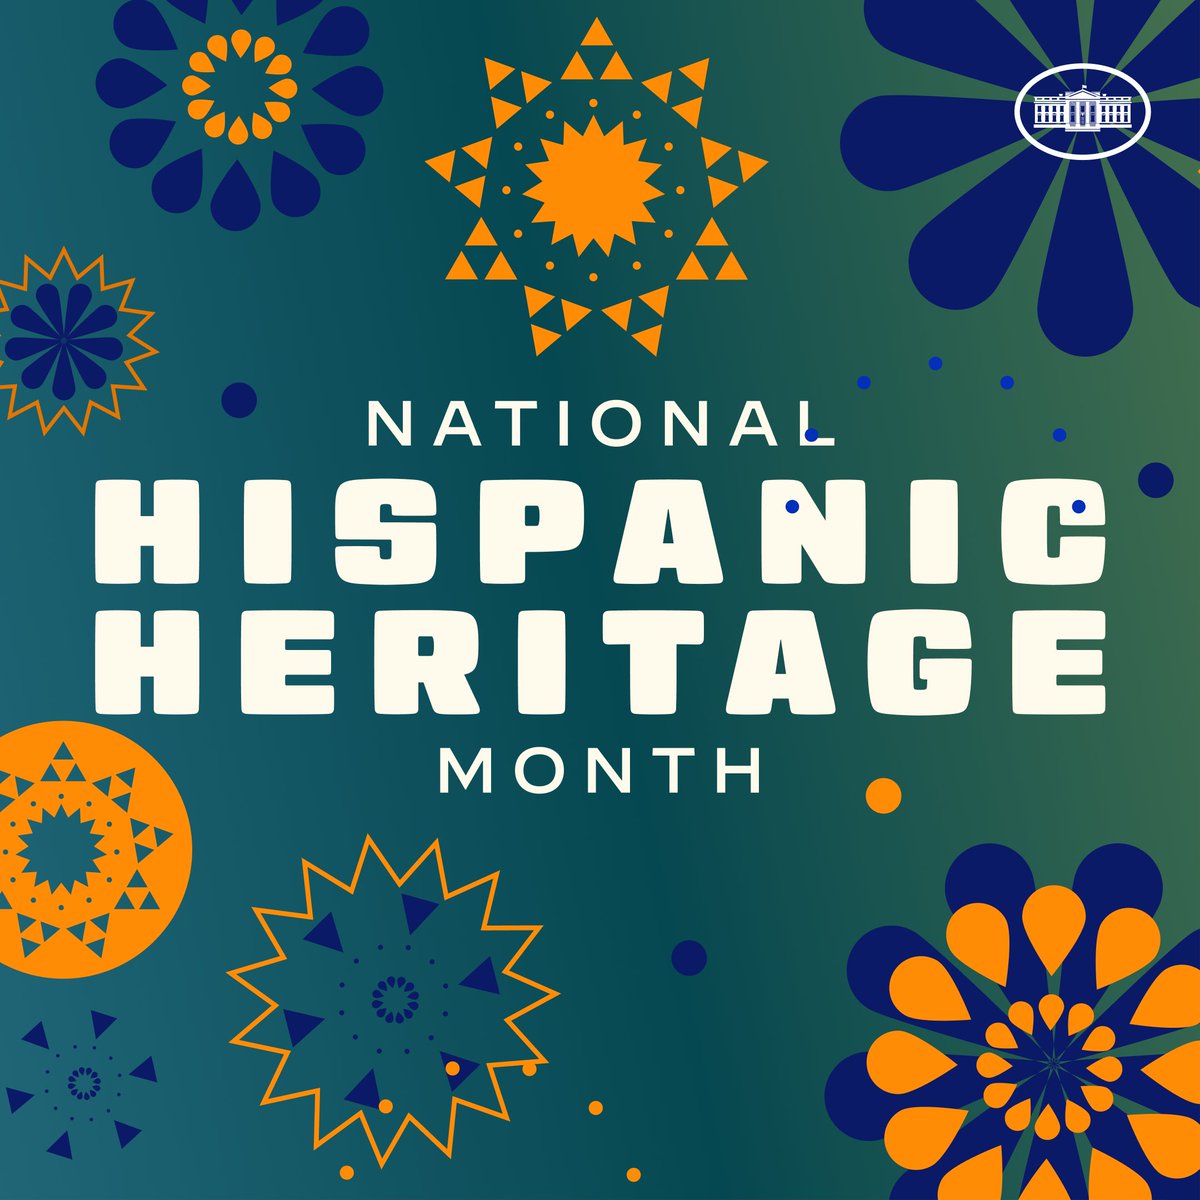 The strength of our country depends on the ingenuity and determination of the Hispanic community. During National Hispanic Heritage Month, we honor these tremendous contributions and recommit to ensuring every person in our nation can thrive.